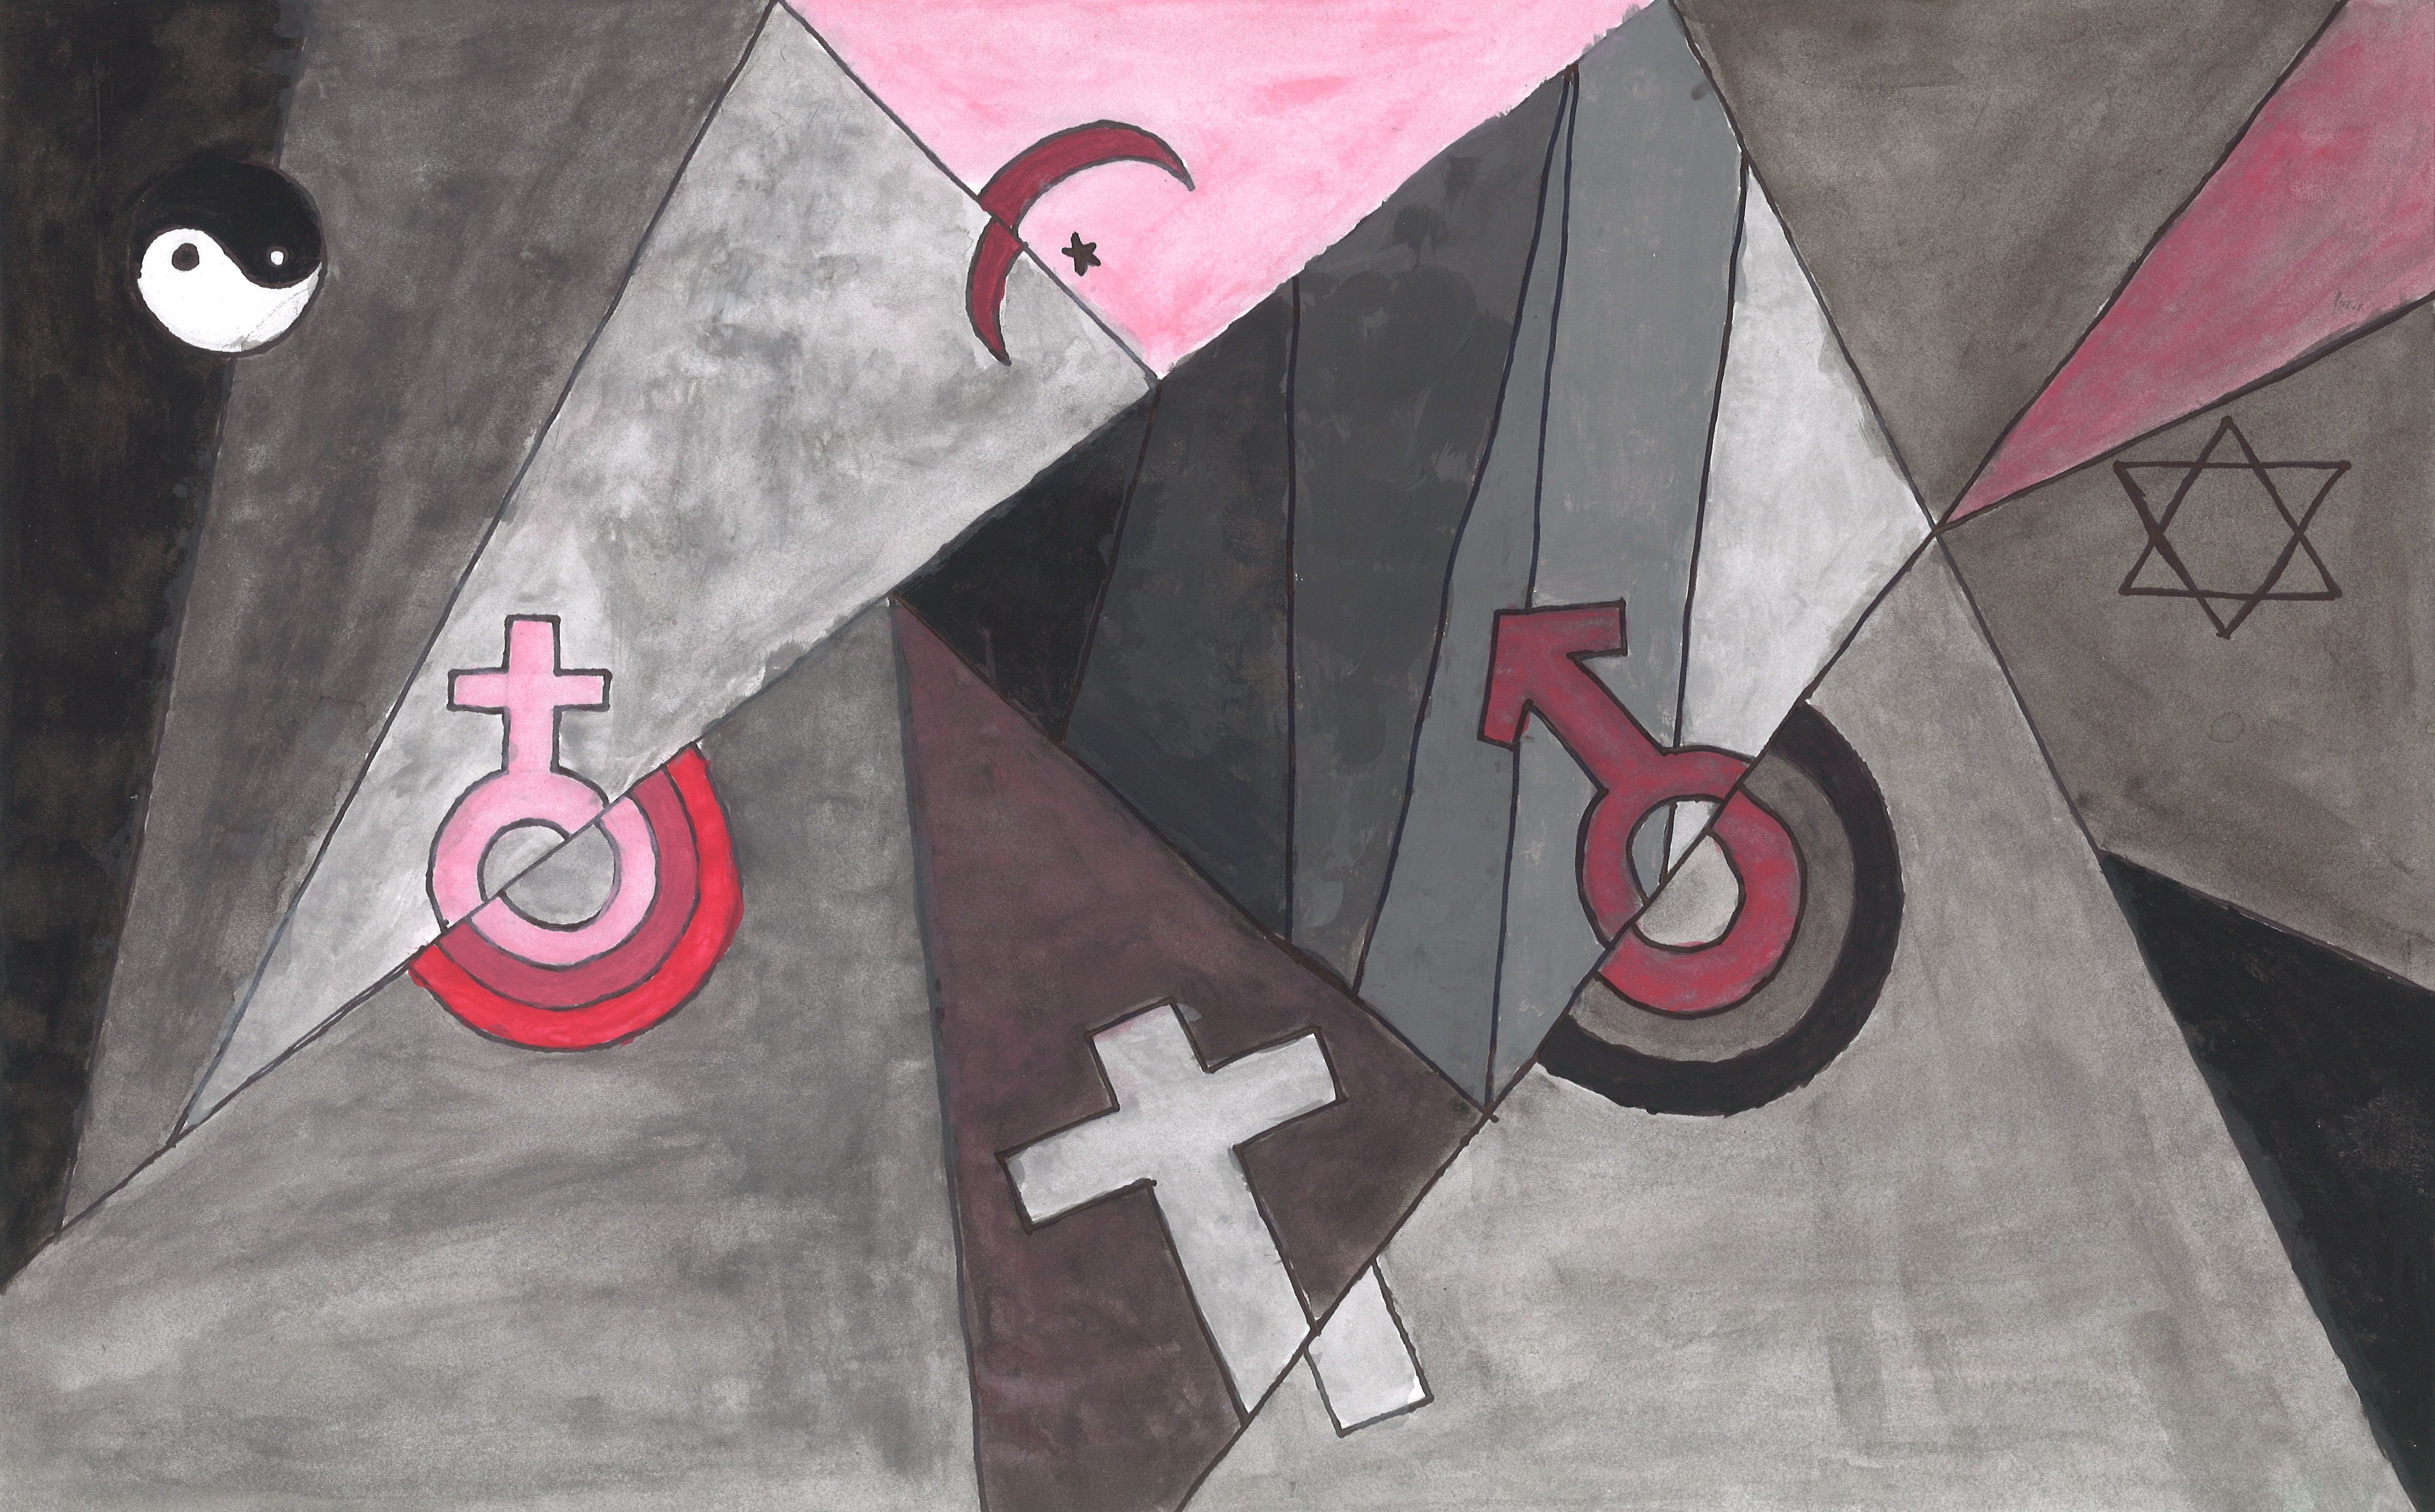 "Equality of Gender & Religion" by Daniela G.